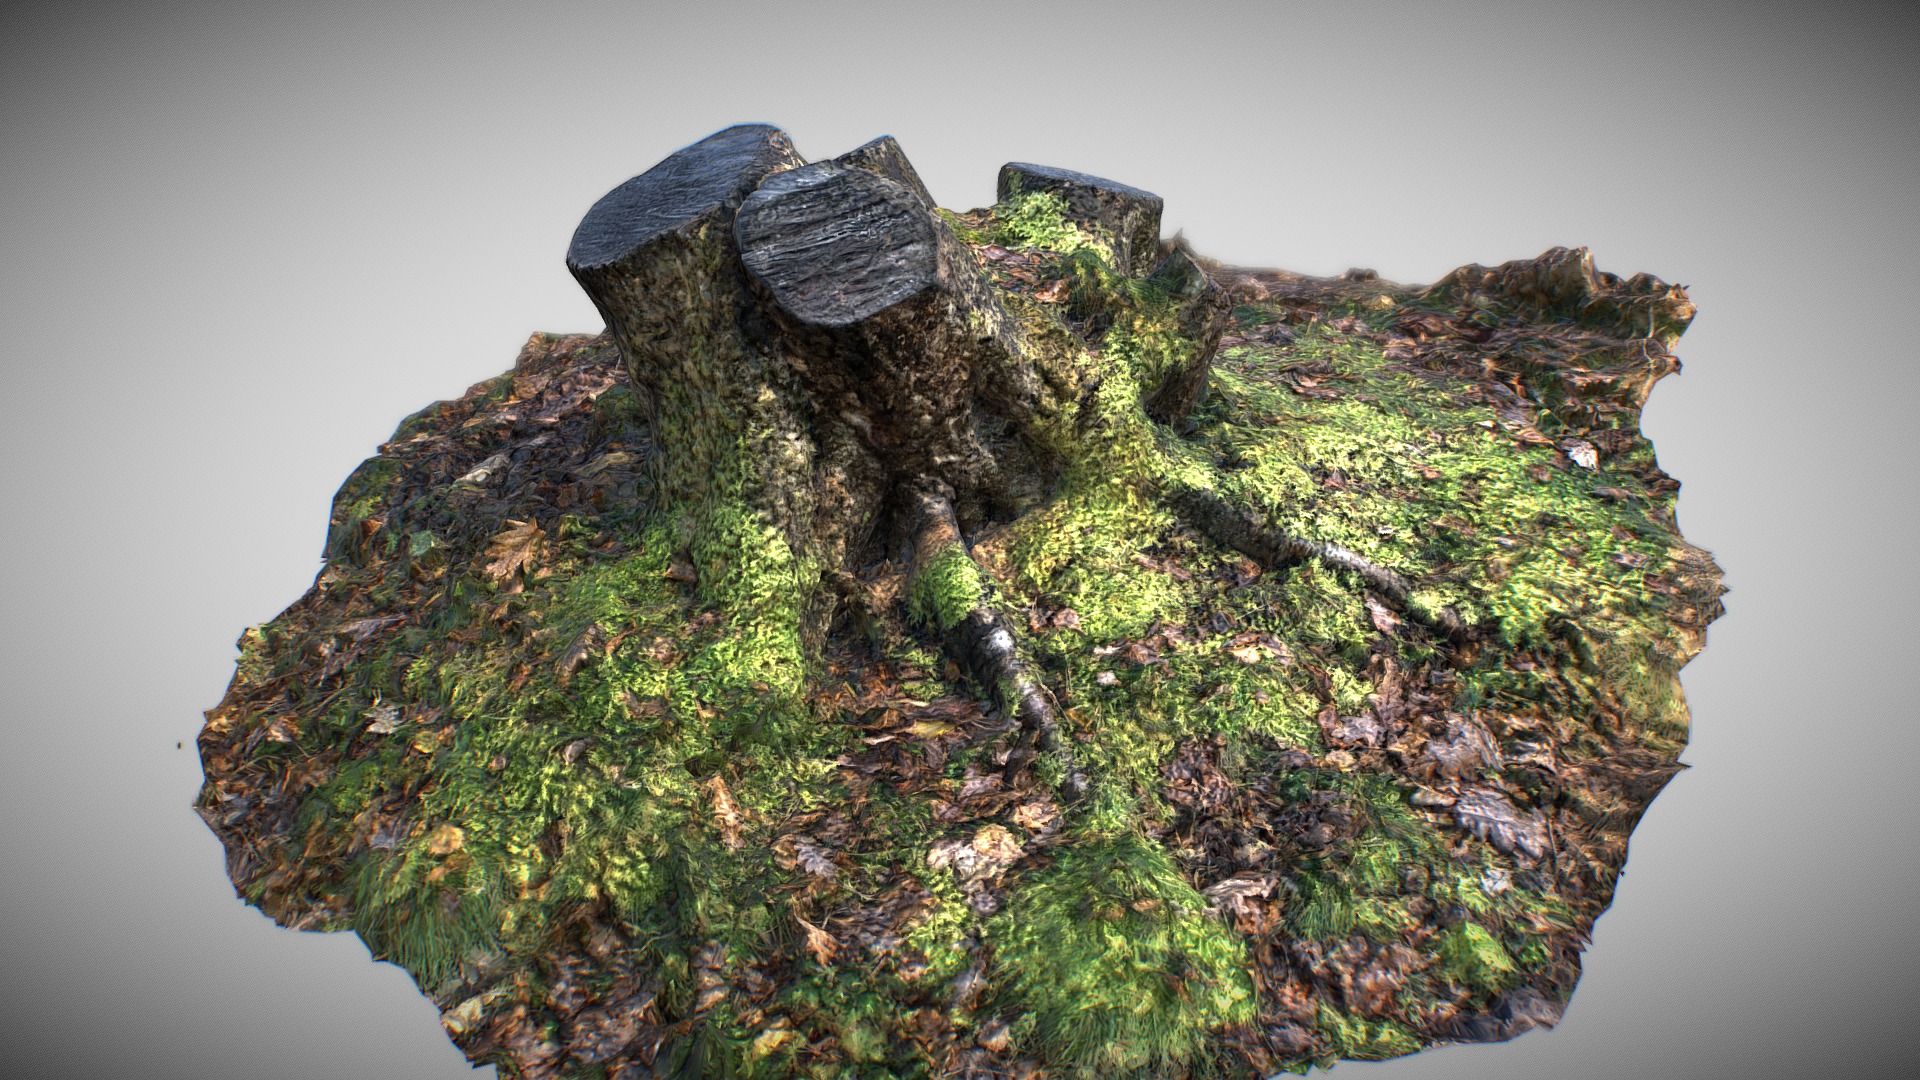 3D model Tree Stump 002: Photogrammetry - This is a 3D model of the Tree Stump 002: Photogrammetry. The 3D model is about a rock with moss growing on it.